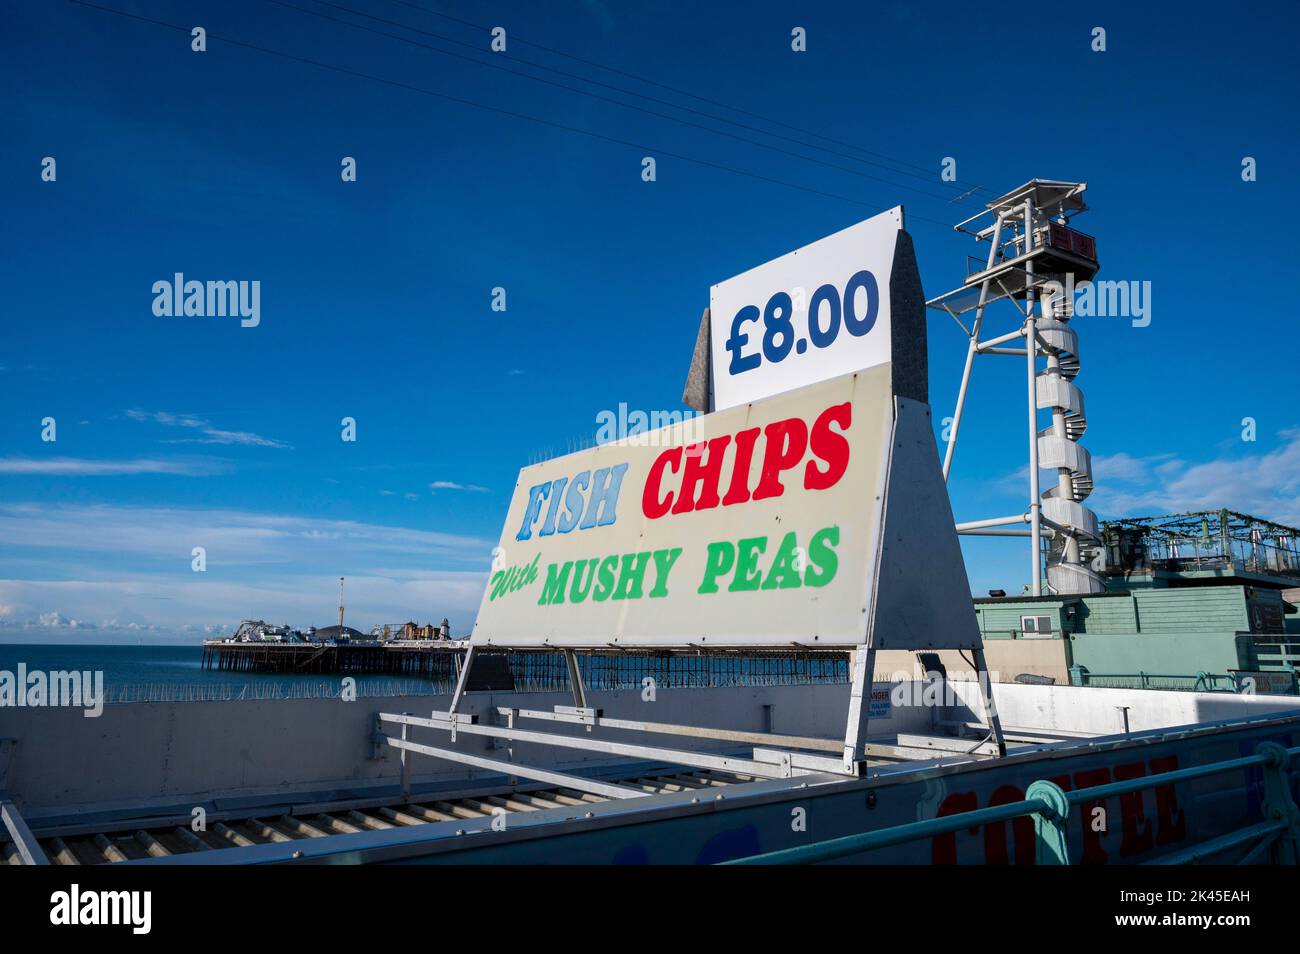 The price of Fish & Chips and Mushy peas at a Brighton seafront cafe , Sussex , England UK  Photograph taken by Simon Dack Stock Photo